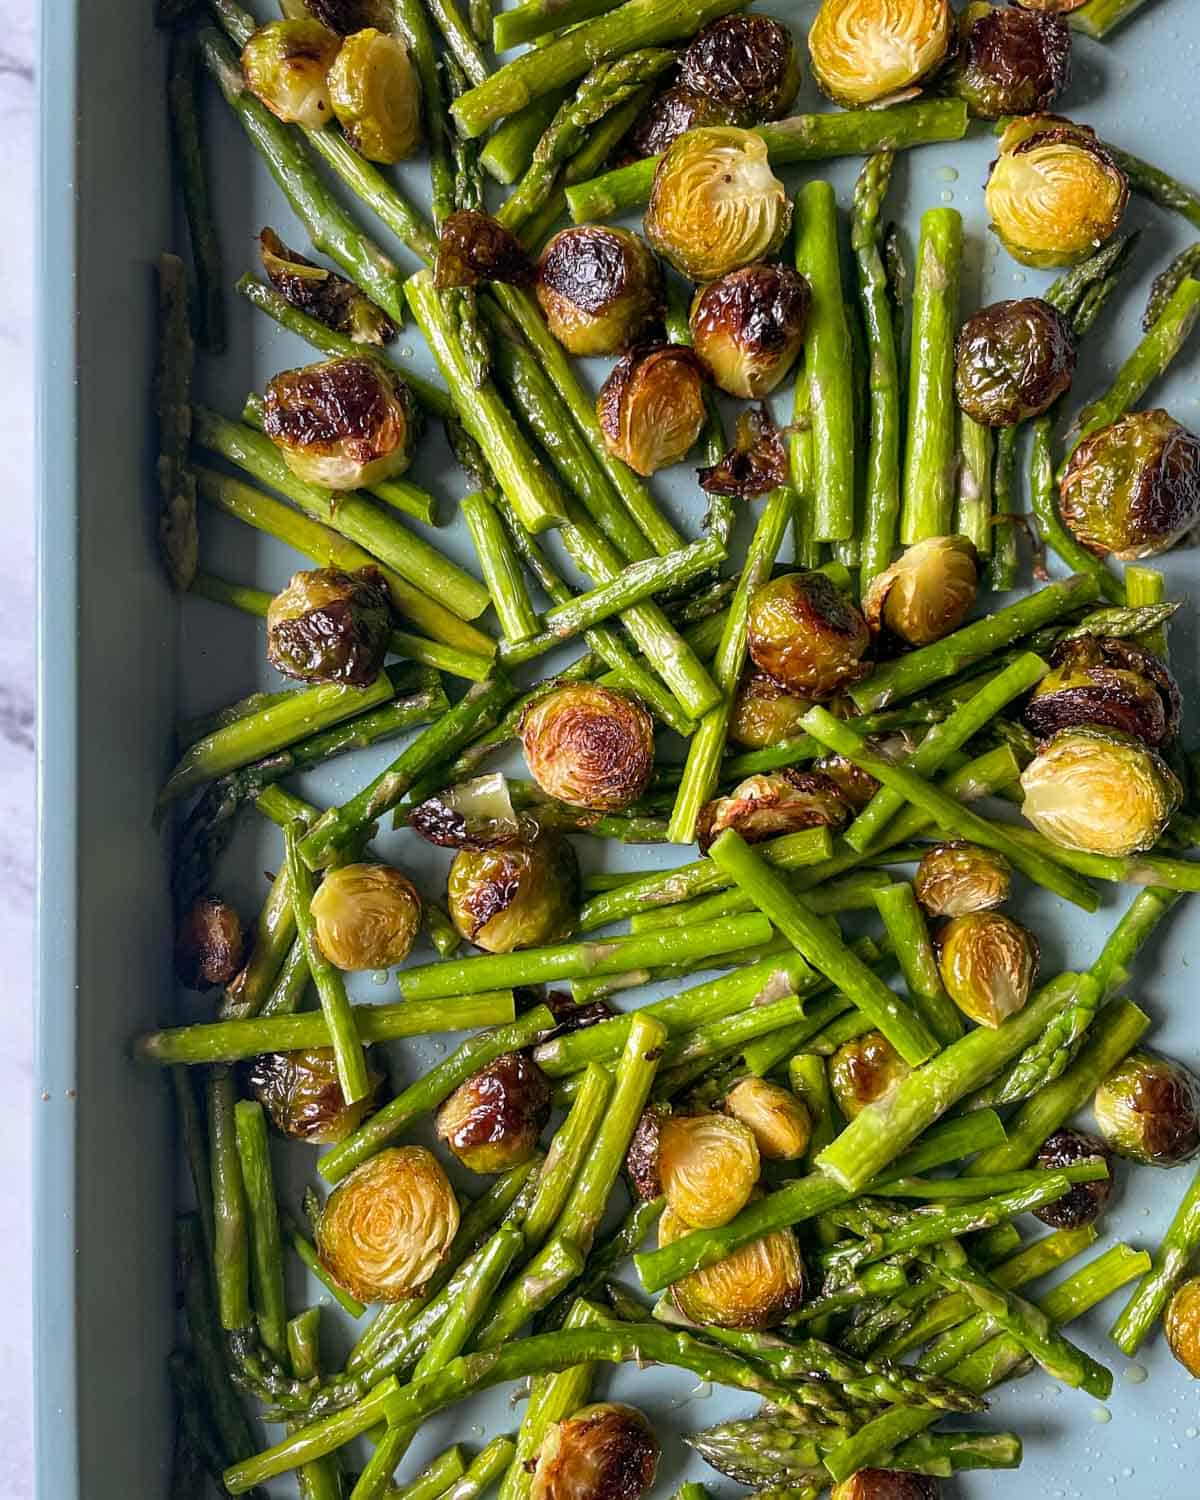 Roasted brussels sprouts and asparagus in a baking pan.